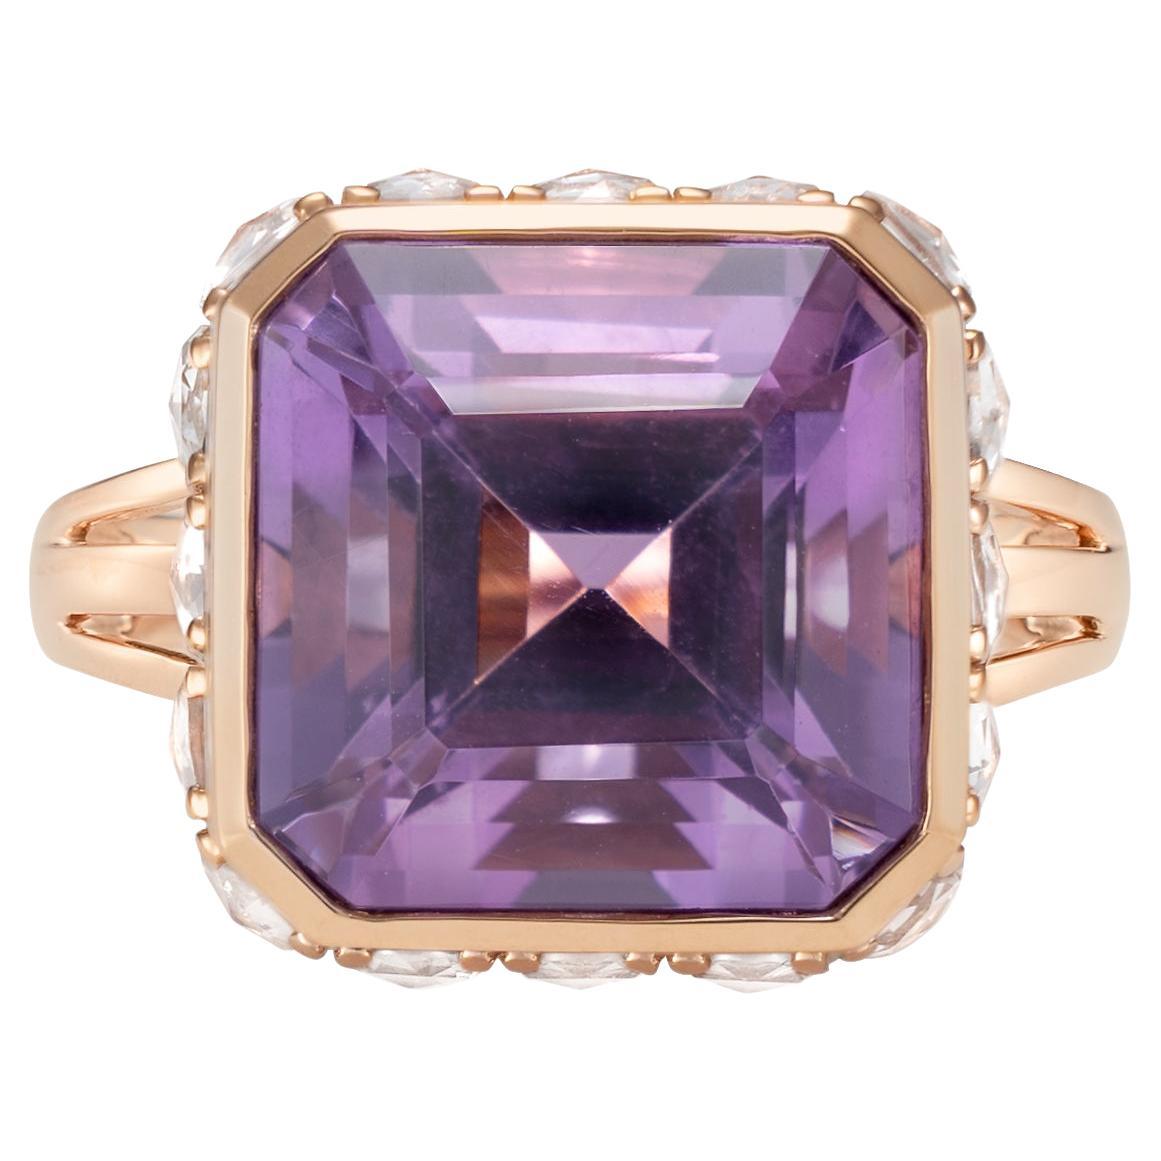 This collection features an suite of bold yet dainty art deco pieces with unique construction. The stunning gemstone vibrantly sits on top of a cluster of diamonds and rose cut white topaz. The unique architecture to construct and combine these